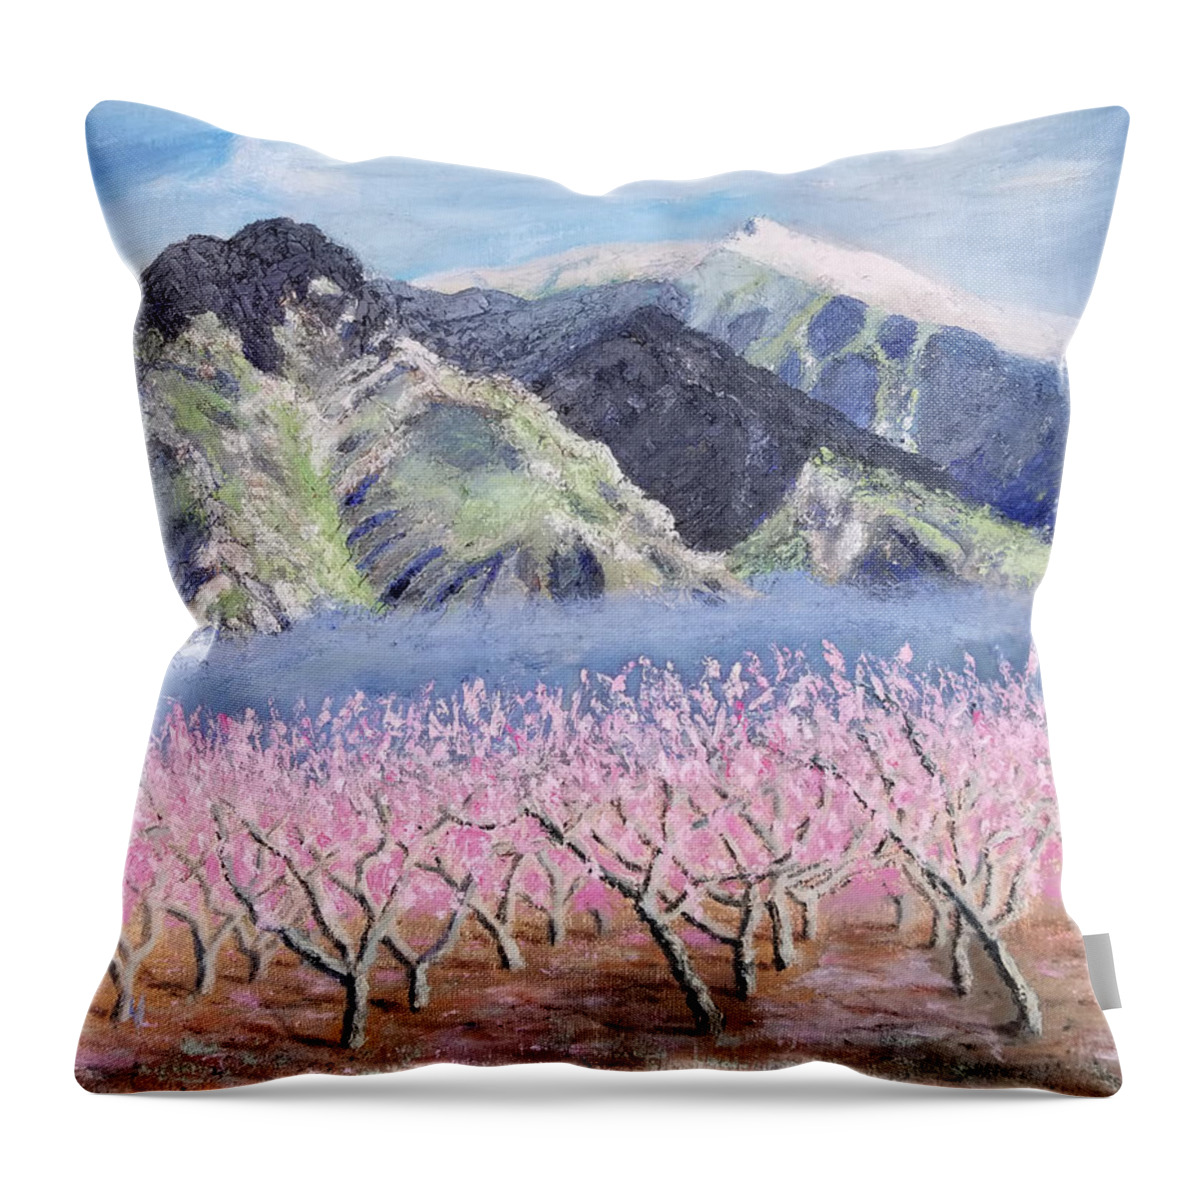 Mountain Throw Pillow featuring the painting Yolande's Canigou by Vera Smith